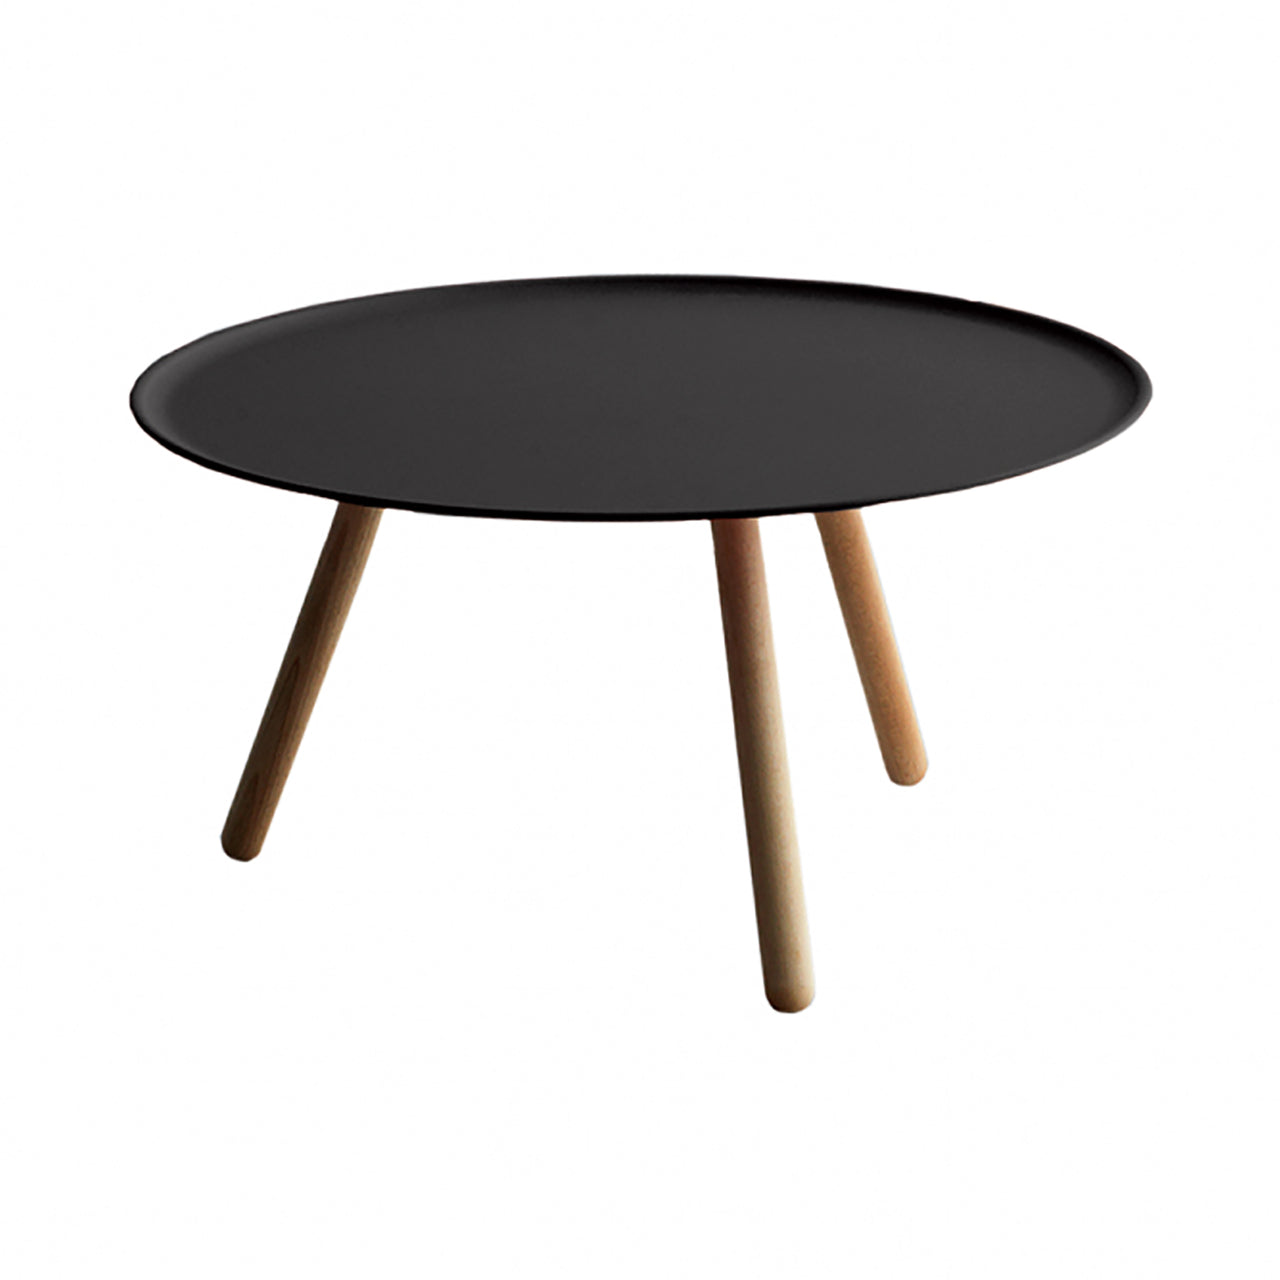 Pinocchio Coffee Table: Large - 25.4